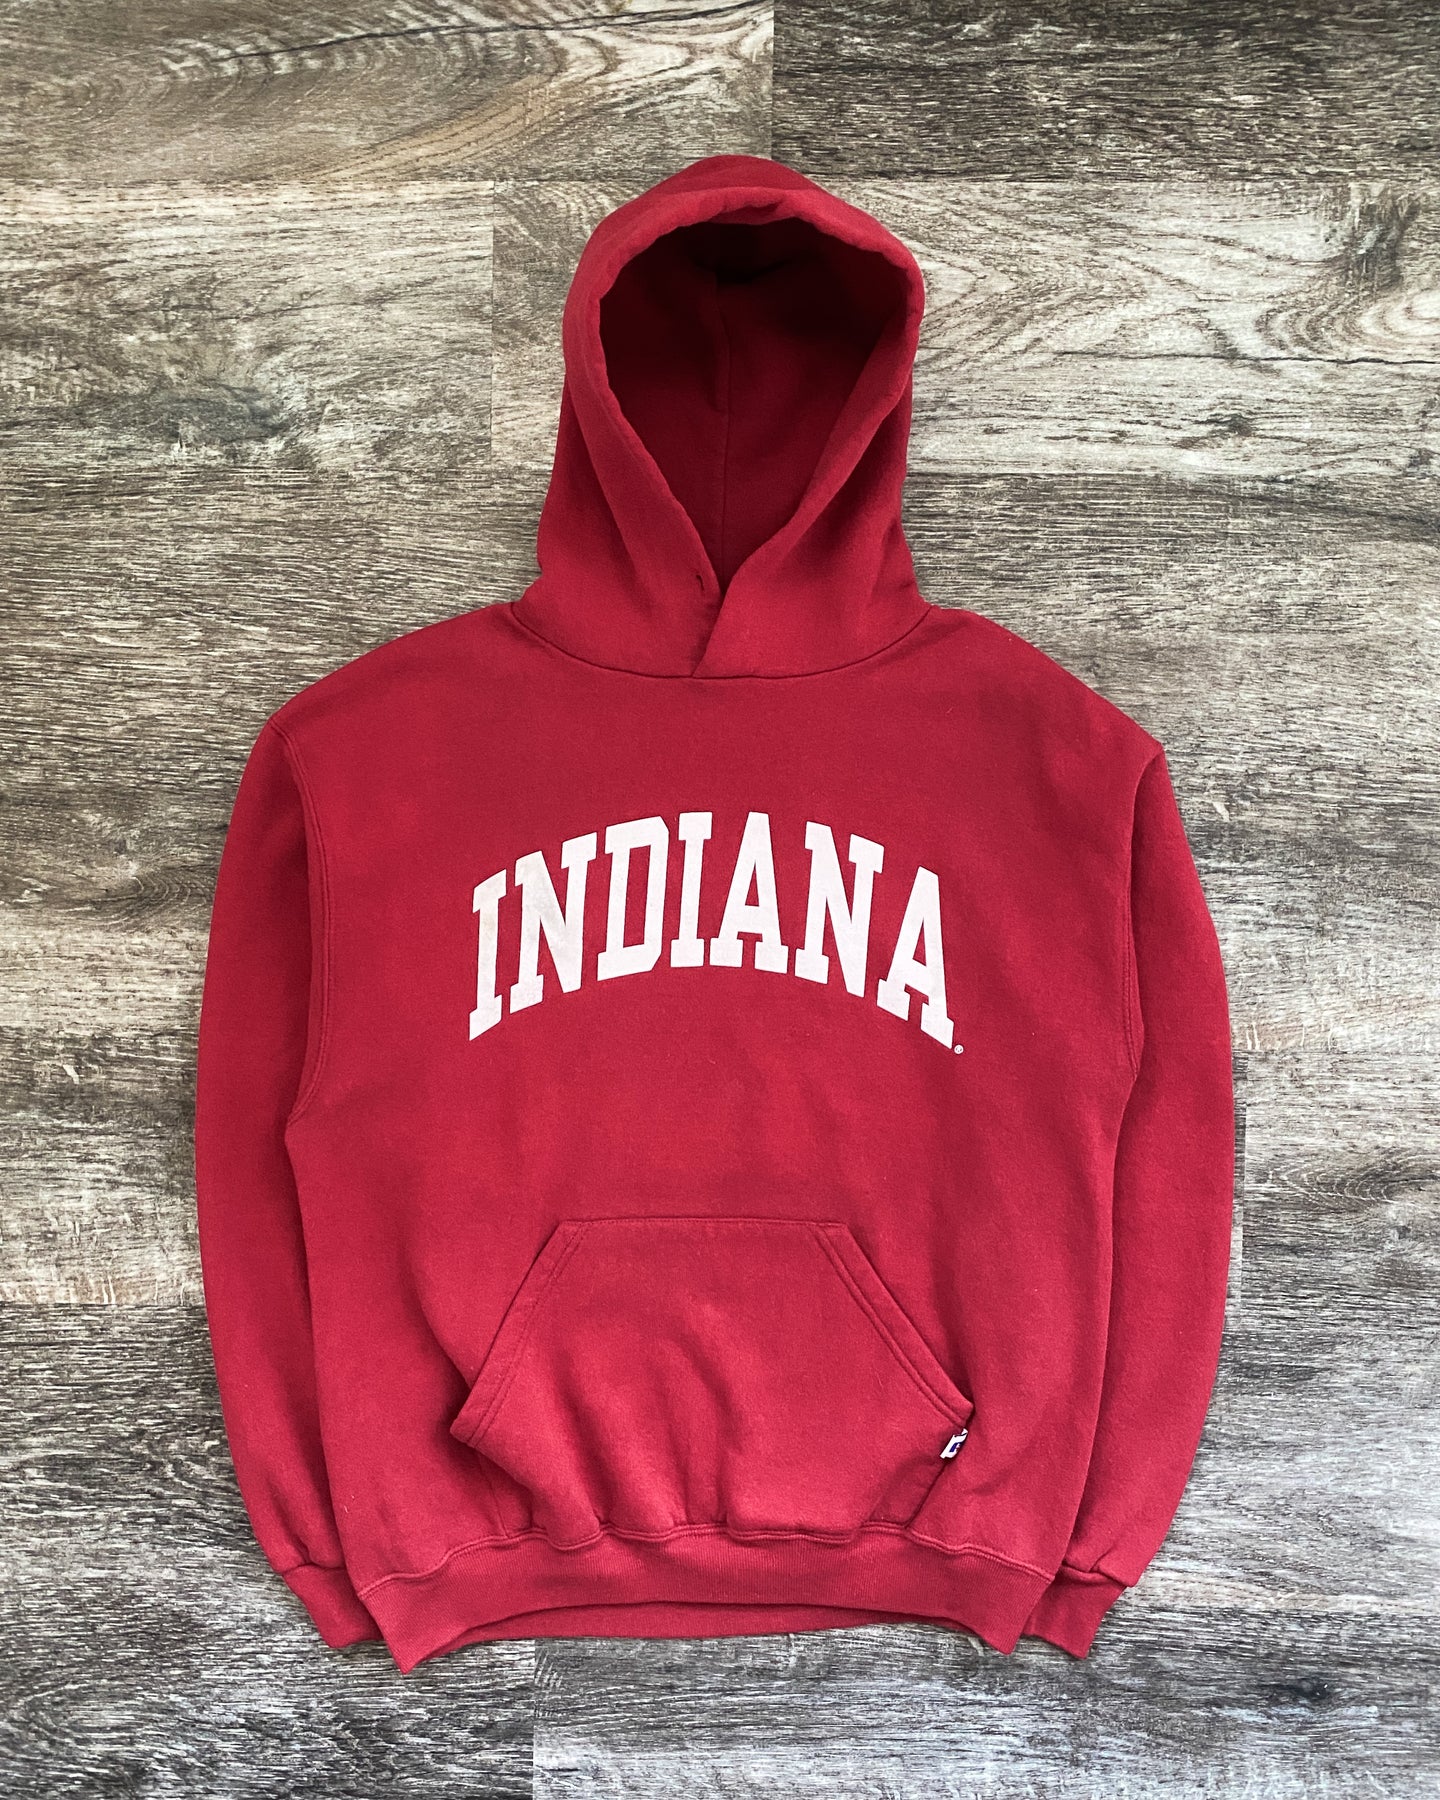 1990s Russell Athletic Indiana Hoodie - Size Medium